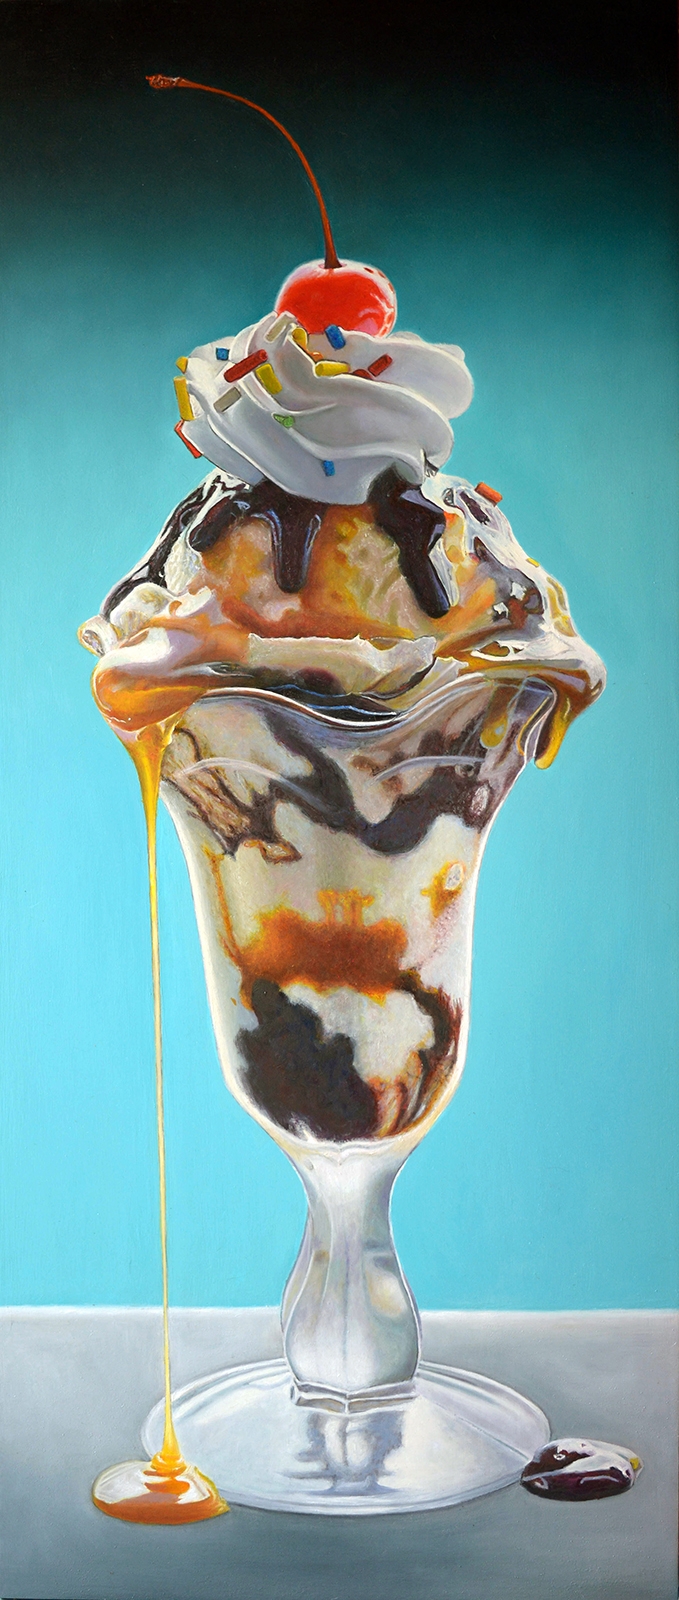 06-Butterscotch Fudge Sundae-Mary-Ellen-Johnson-A-Sweet-Tooth-s-Dream-in-Food-Art-Paintings-www-designstack-co